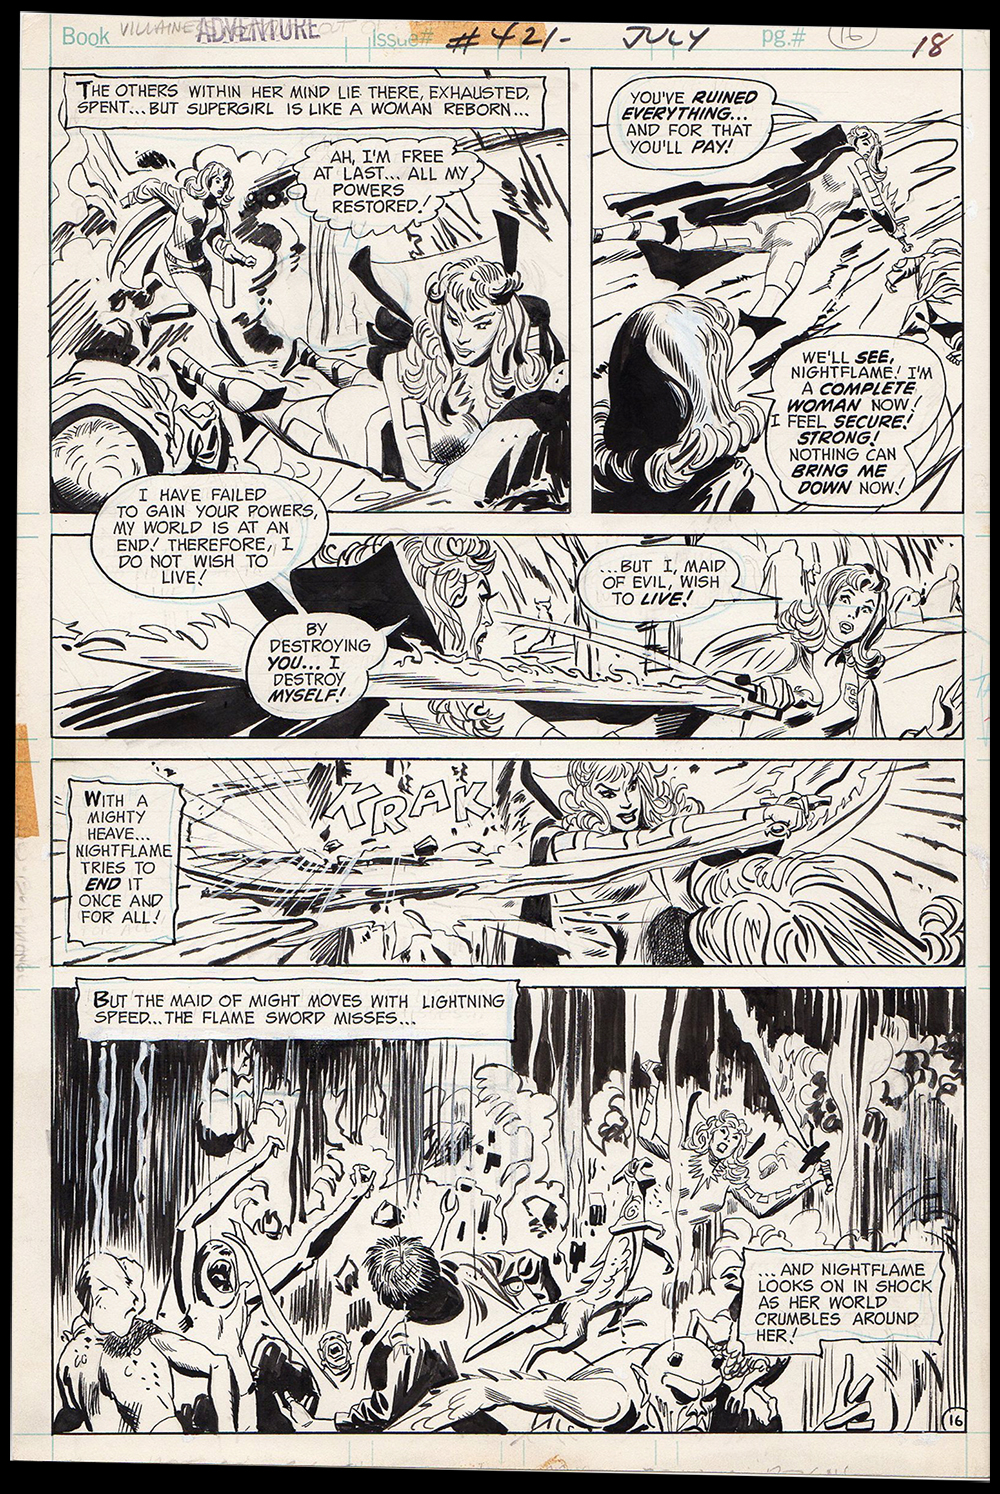 Image: Adventure Comics #421 page 16 art by Mike Sekowsky